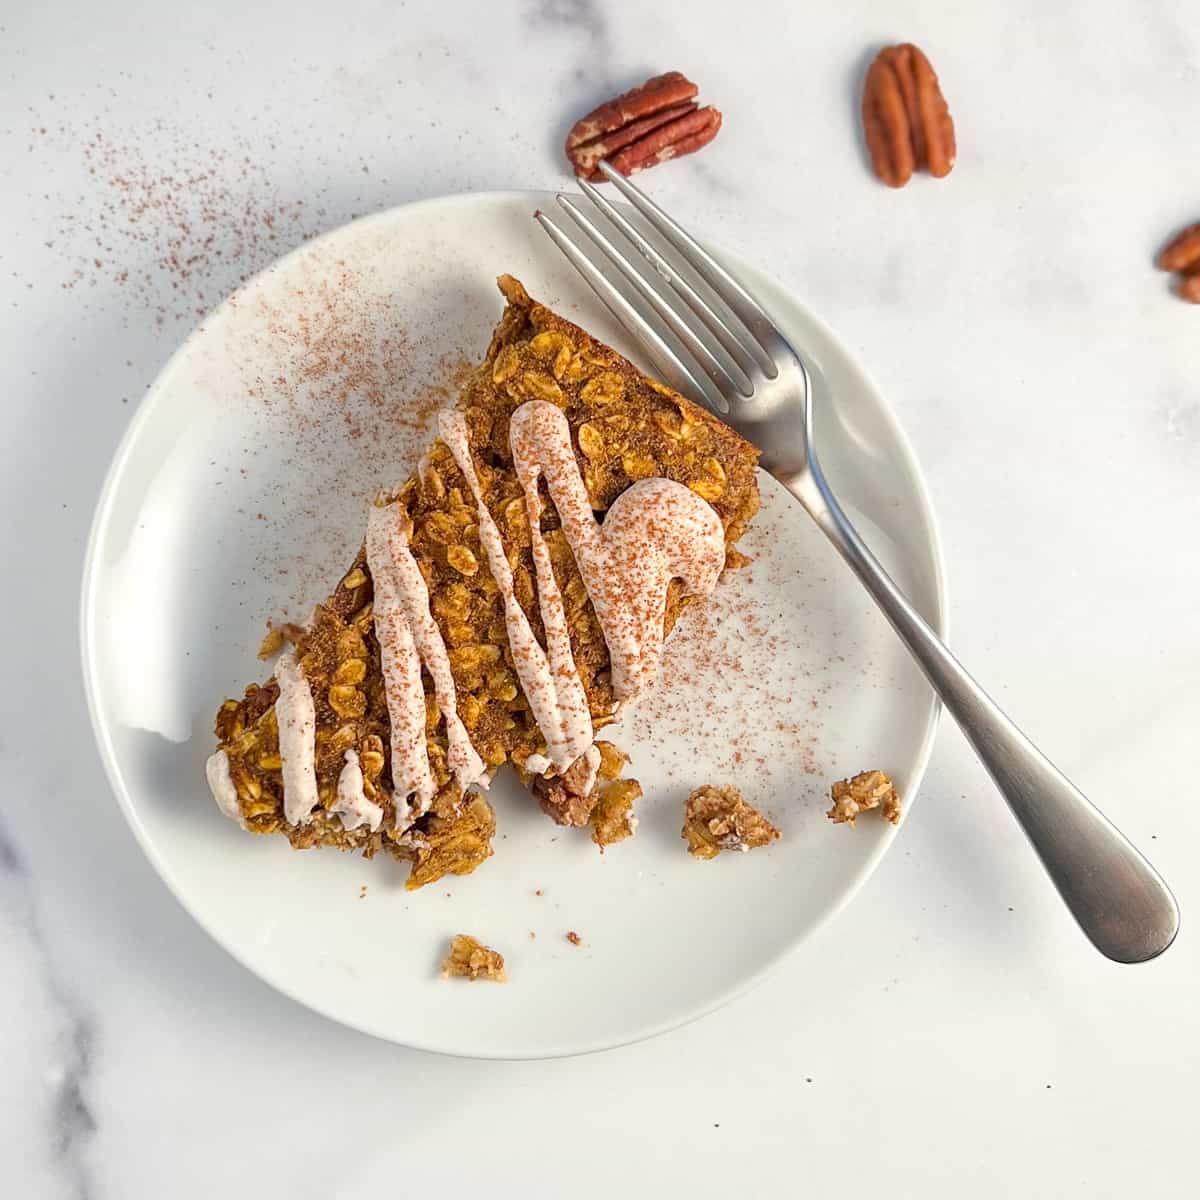 top view close up of a pumpkin oatmeal bar with sweet cashew cream drizzled on top on a round white plate with fork on the side and loose pecans scattered on a marble surface